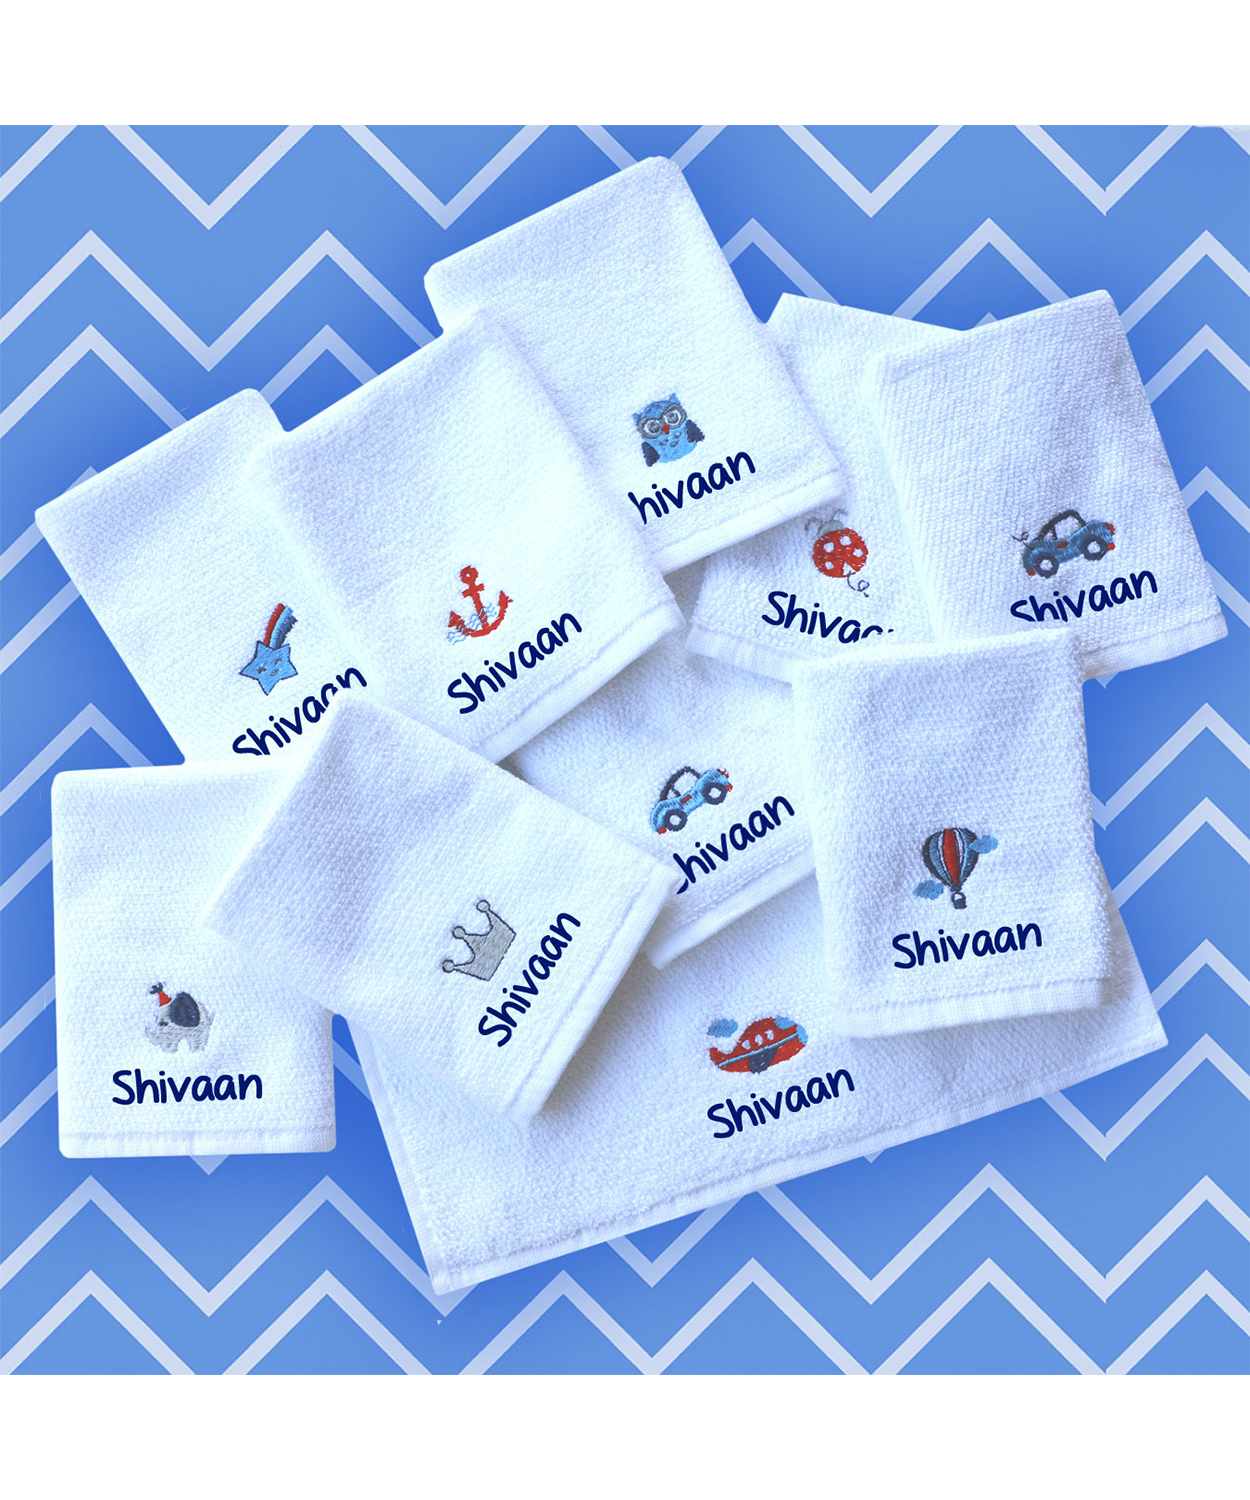 Personalised All Things Boys - Set of 10 Face Towels